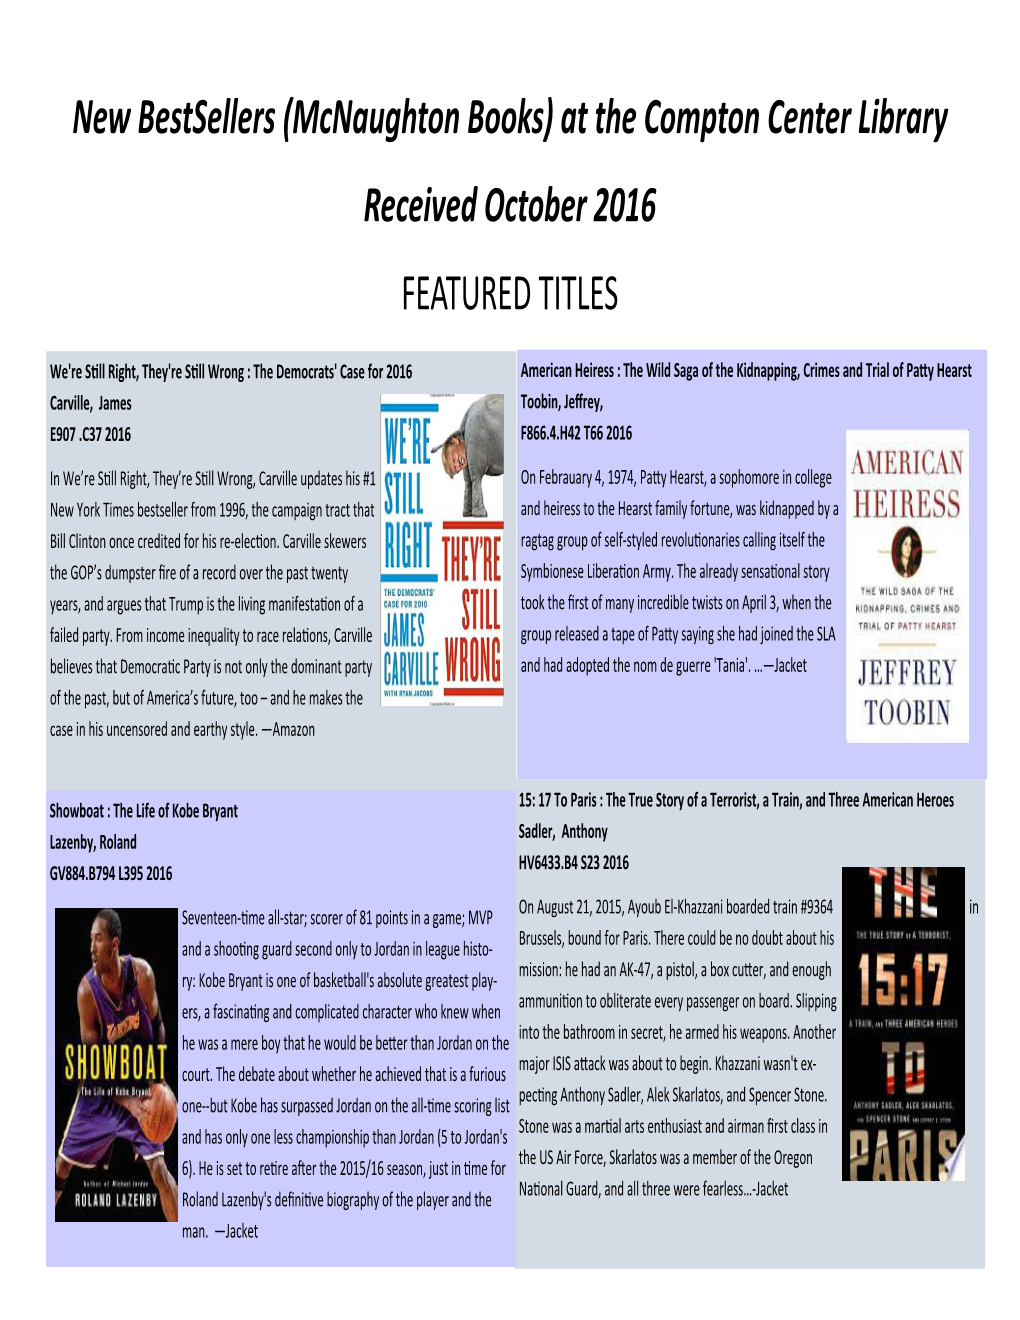 New Bestsellers (Mcnaughton Books) at the Compton Center Library Received October 2016 FEATURED TITLES